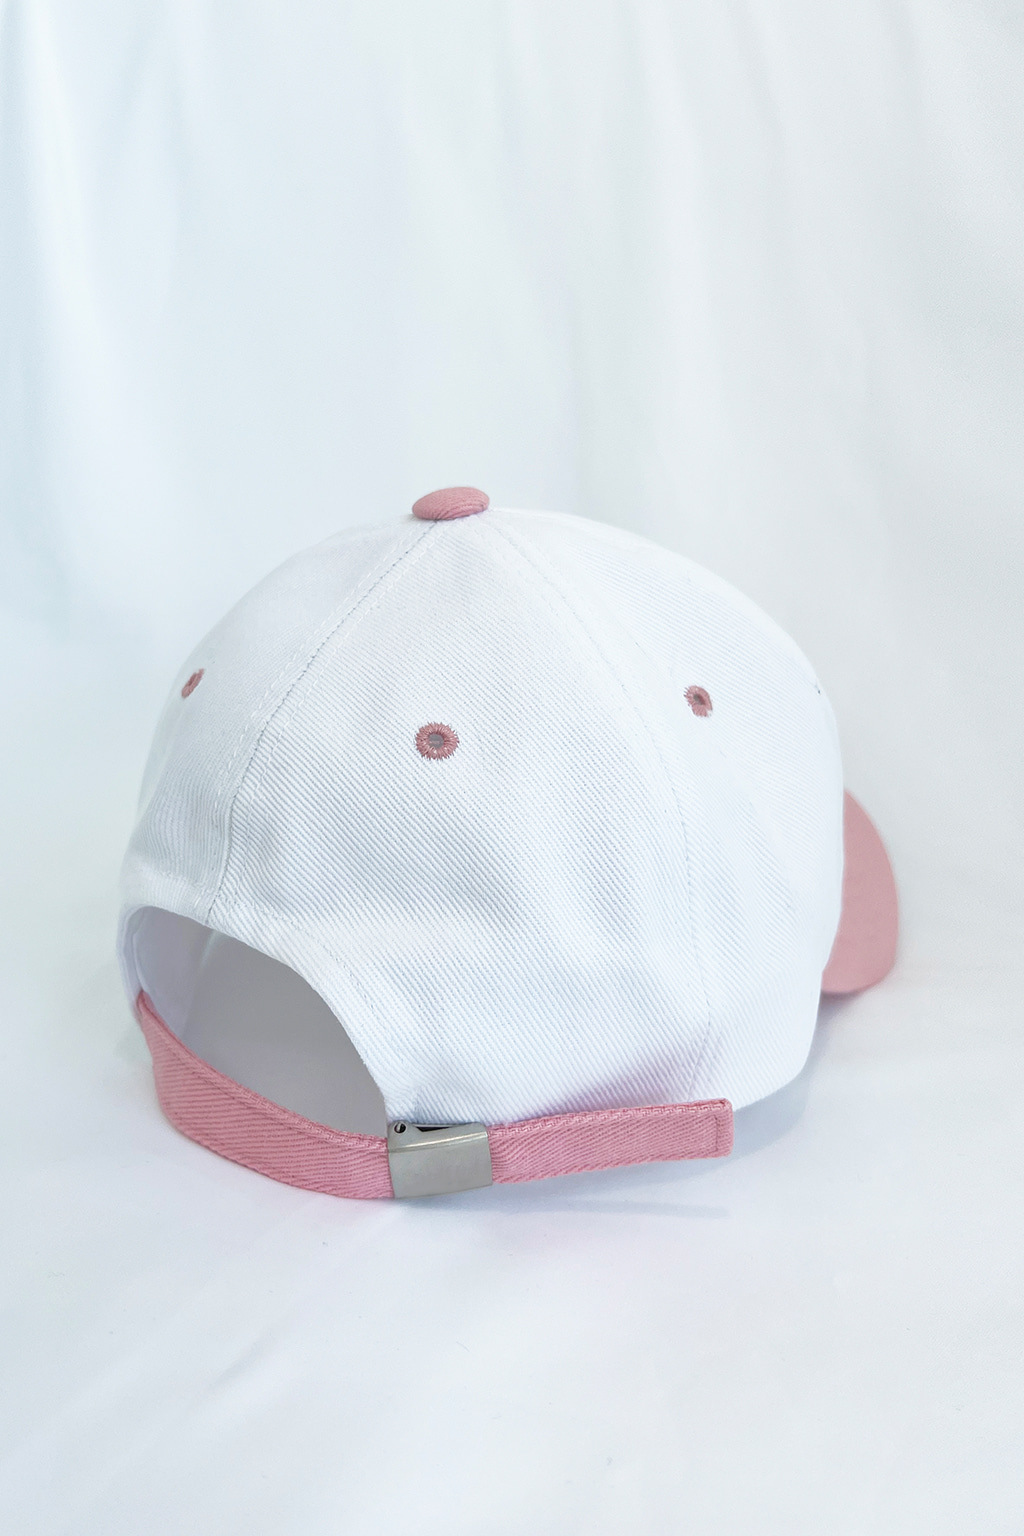 Hipsy color matching ball cap strawberry pink